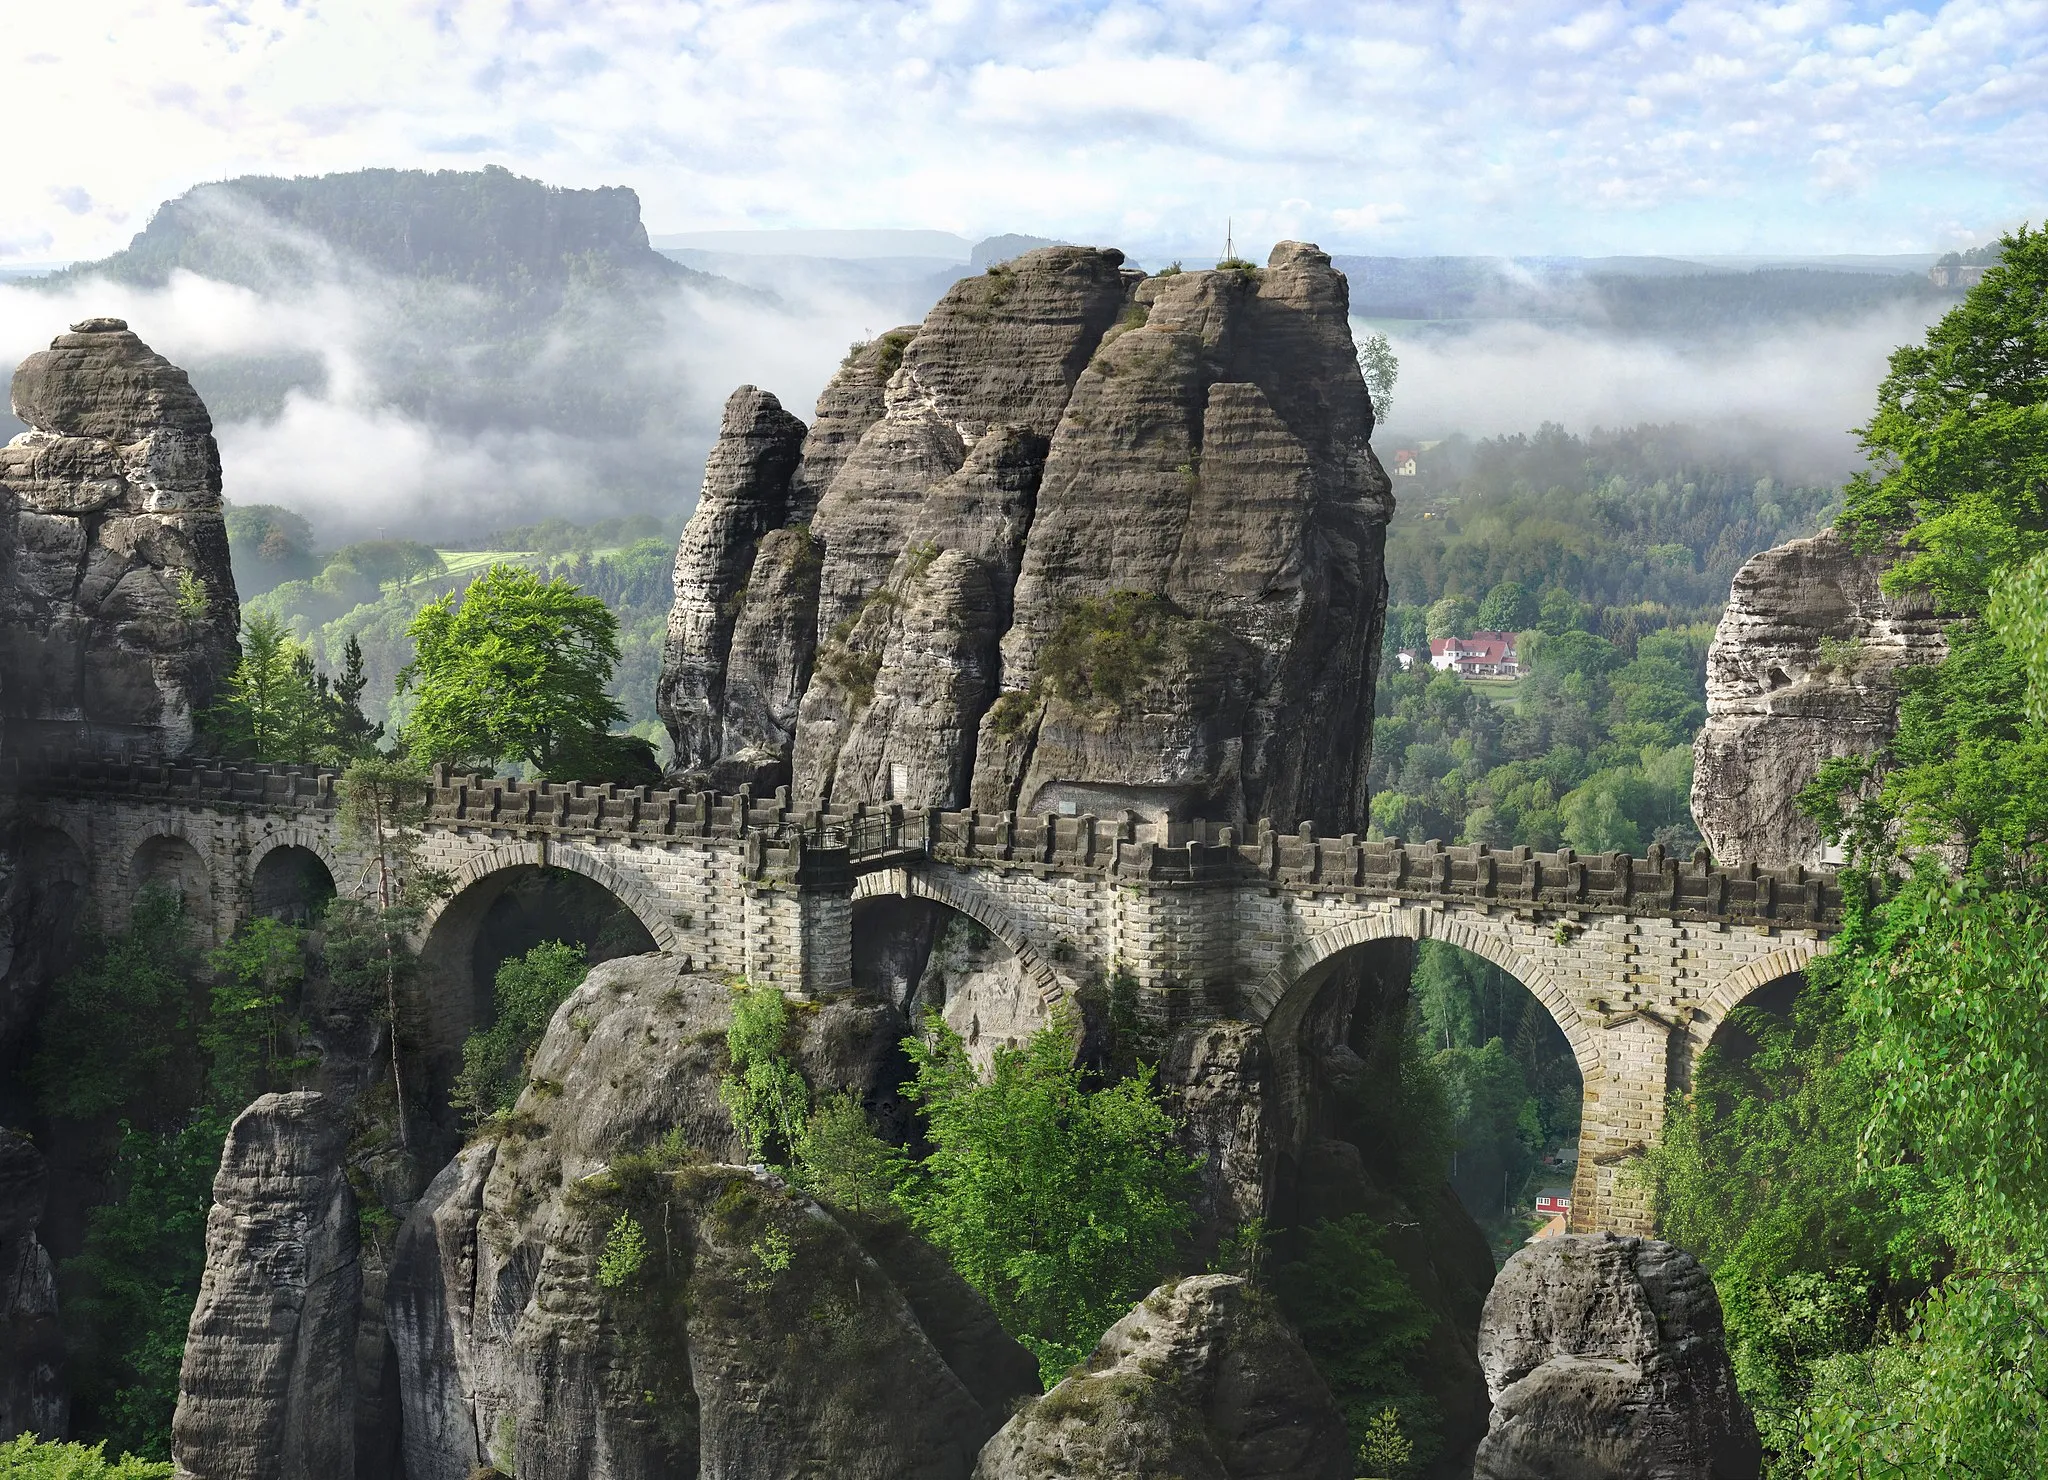 Photo showing: The picture shows the Bastei Bridge morning in the mist.
This bridge is 76.5 meters long and crosses the Martertelle. It creates a link between the Neurathen Castle and the Bastei at an altitude of 165 meters above the river Elbe. It was built in the years 1850/51 and has become the symbol of the Saxon Switzerland.